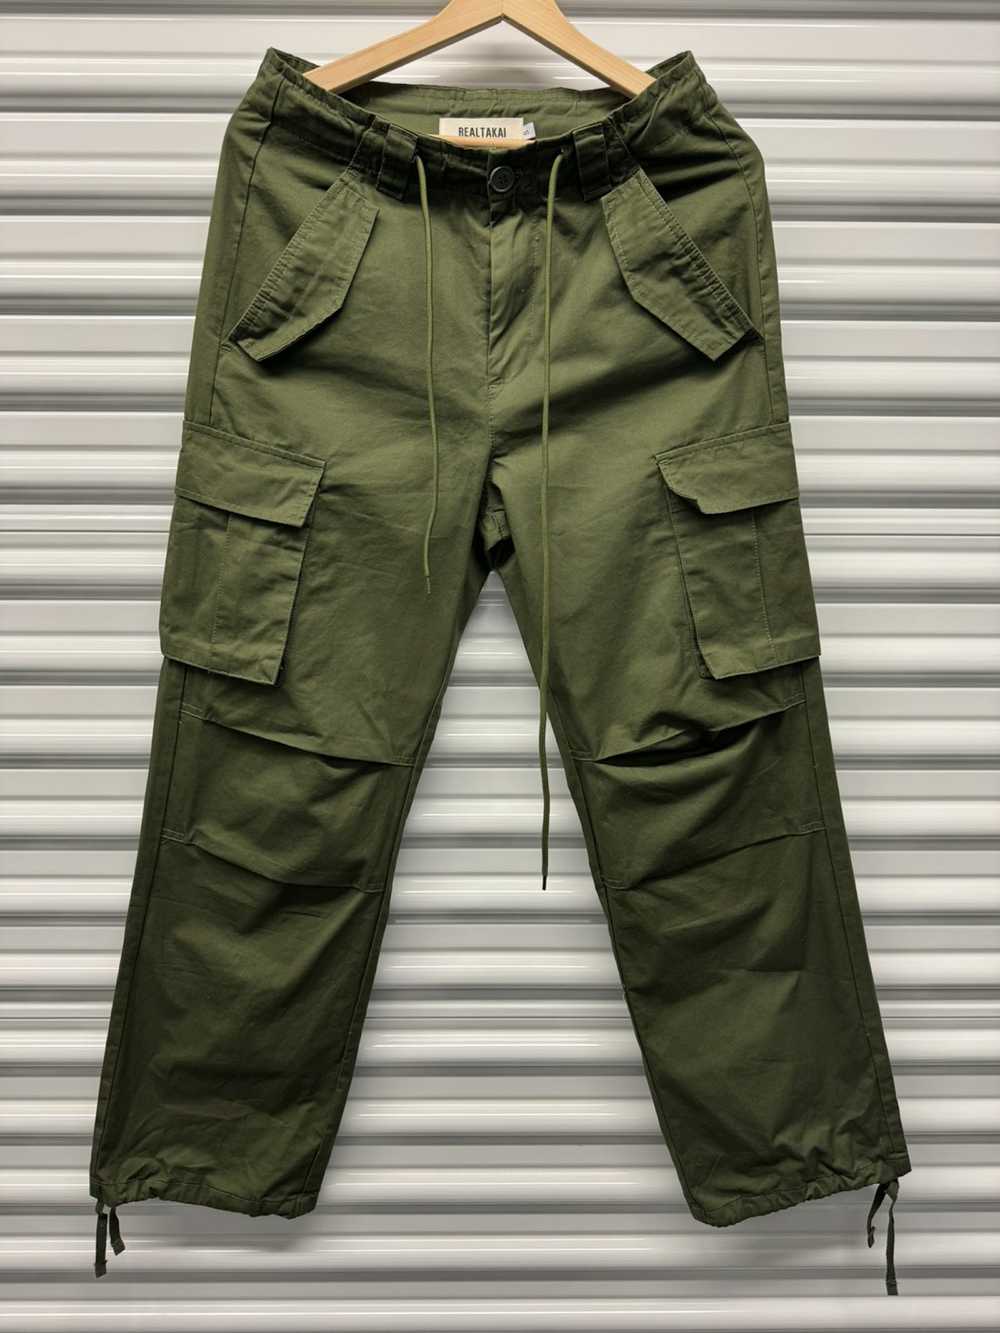 Vintage Military style cargo pants - image 1